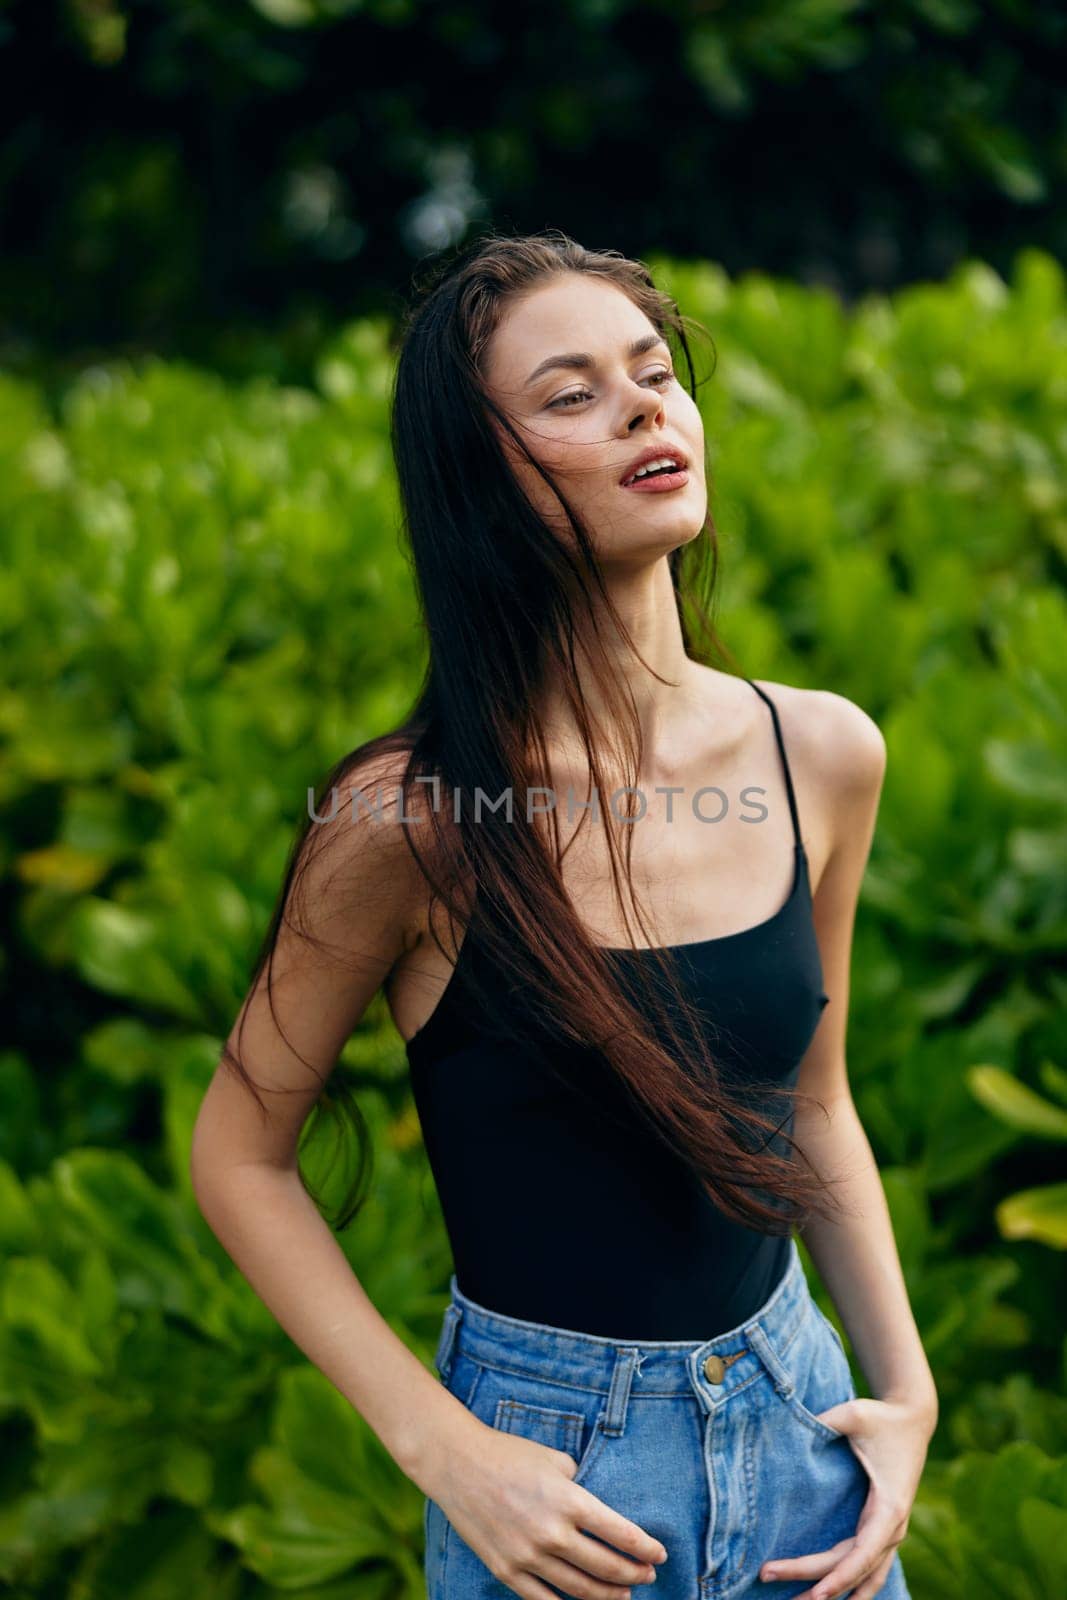 woman sunny t-shirt bag hair bali long lifestyle beautiful park natural happiness summer quiet sunset fashion walk smiling nature smile portrait freedom